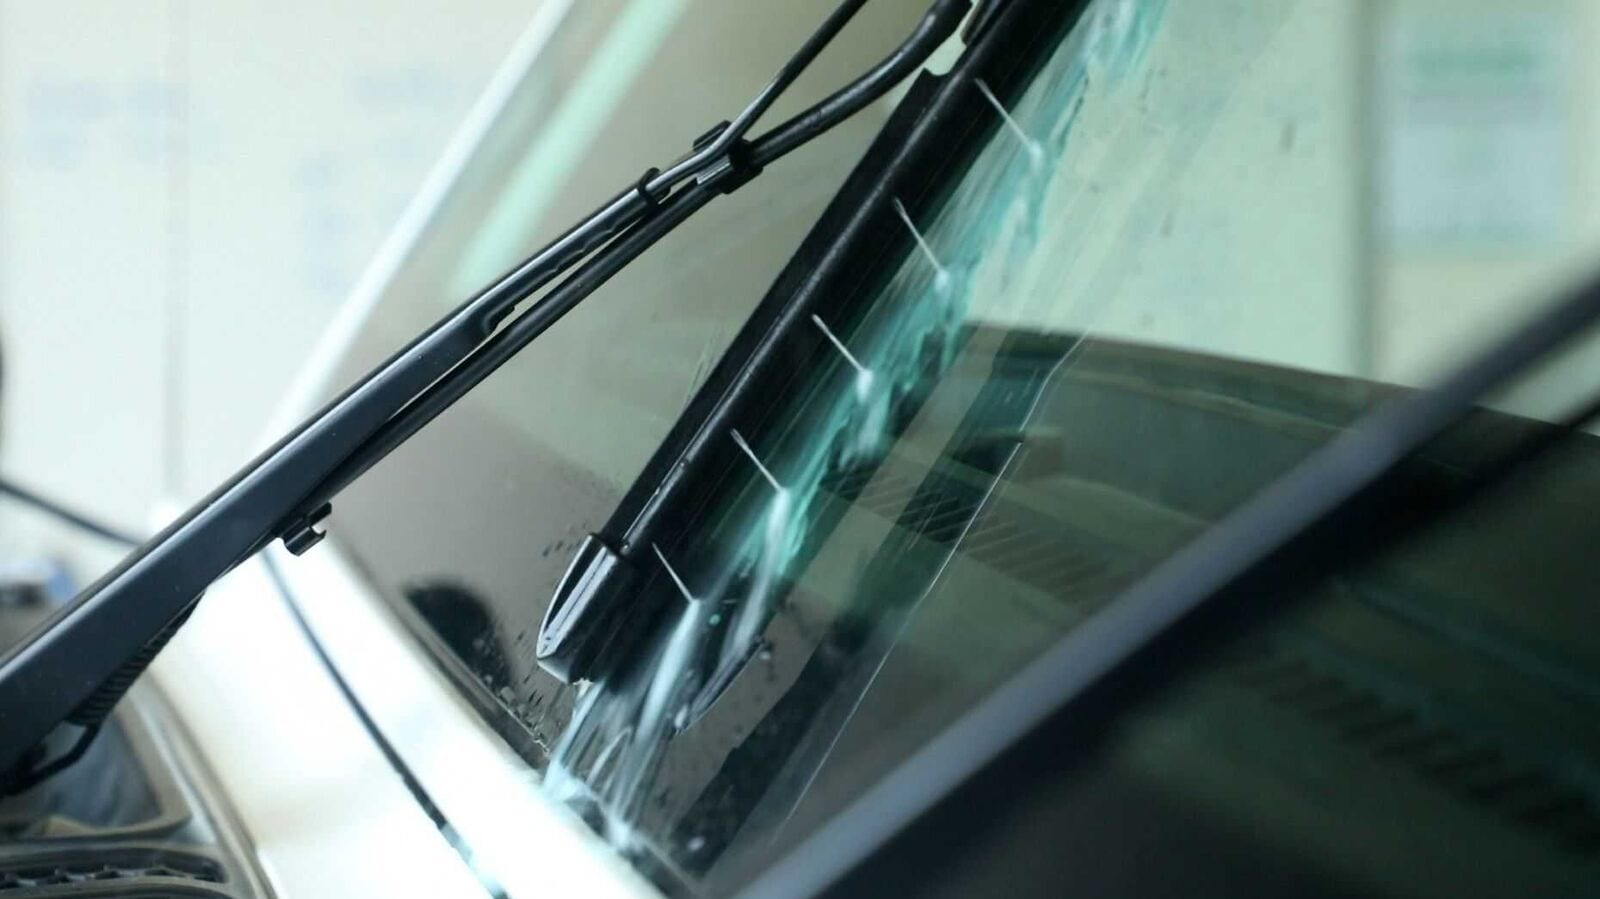 Jeep's new windshield wiper cleans glass in a single swipe, uses less fluid  | HT Auto